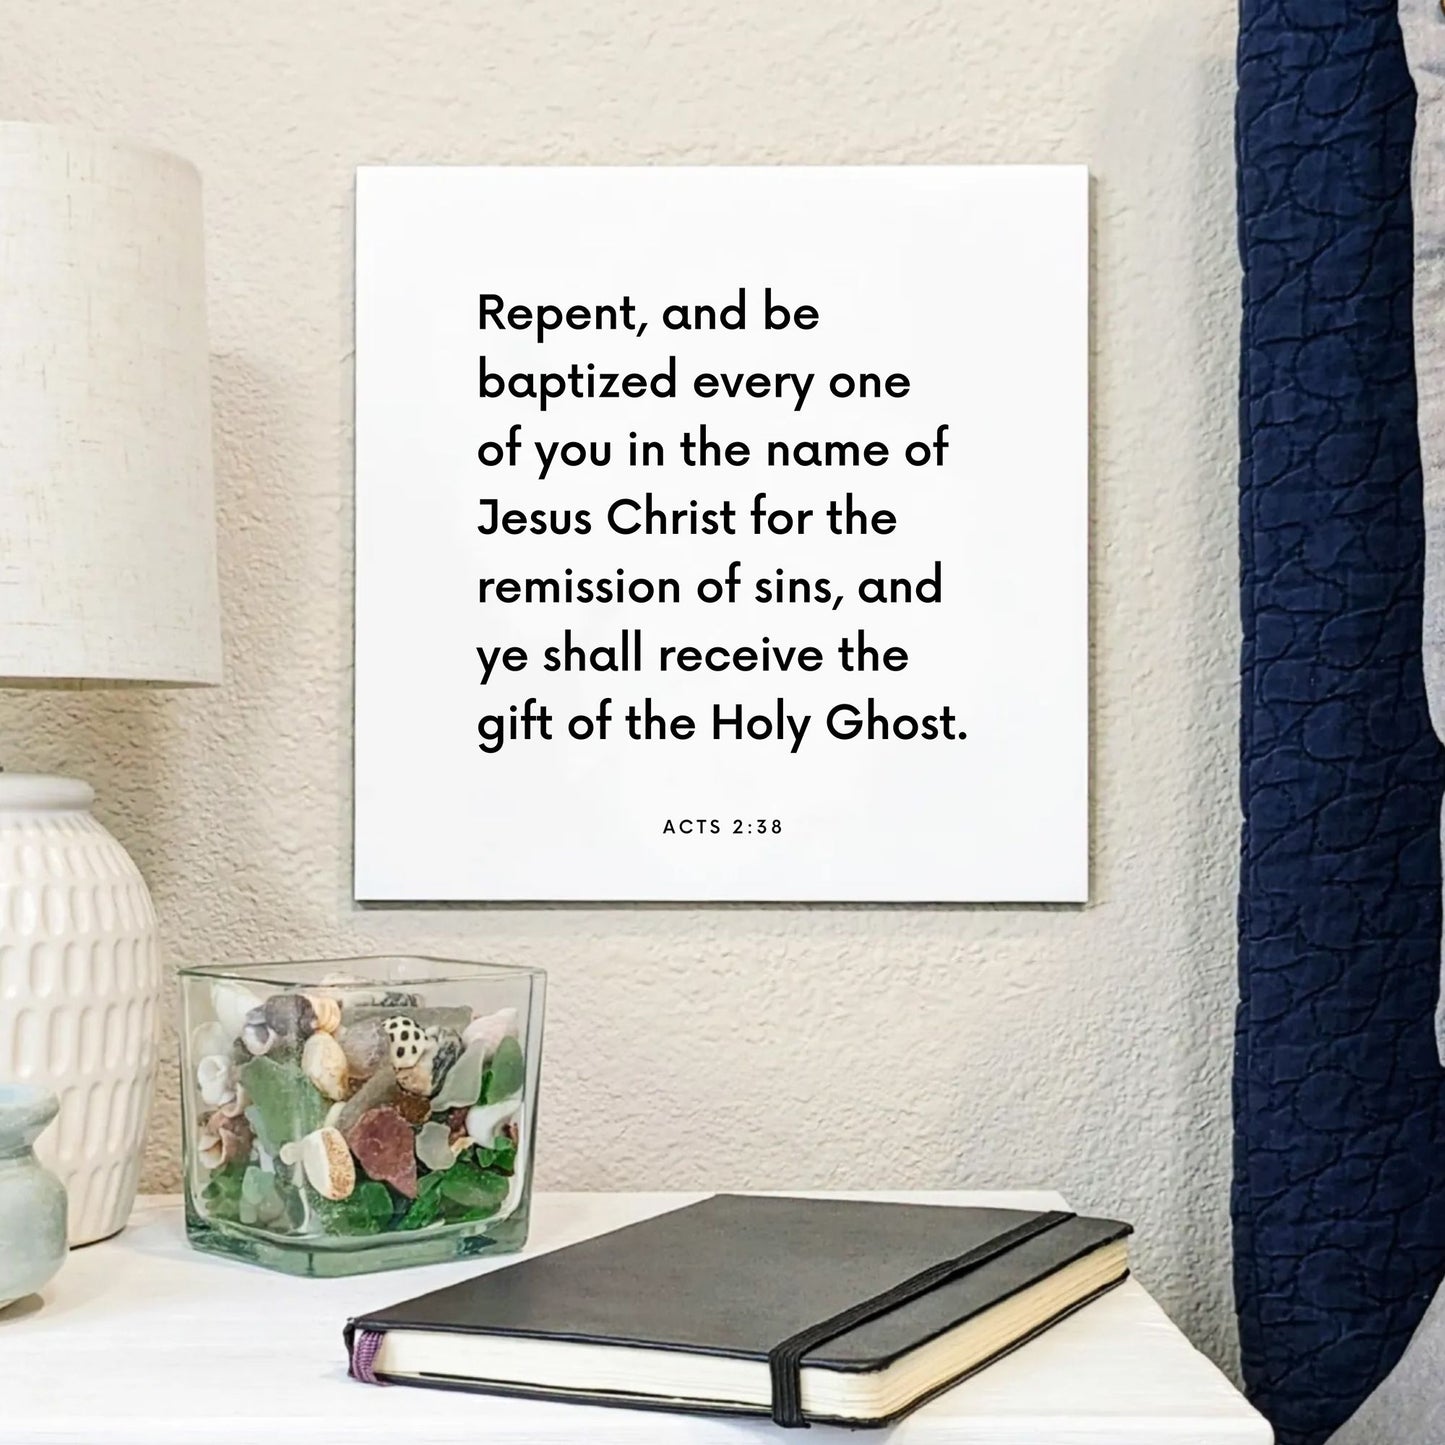 Bedside mouting of the scripture tile for Acts 2:38 - "Repent, and be baptized every one of you"